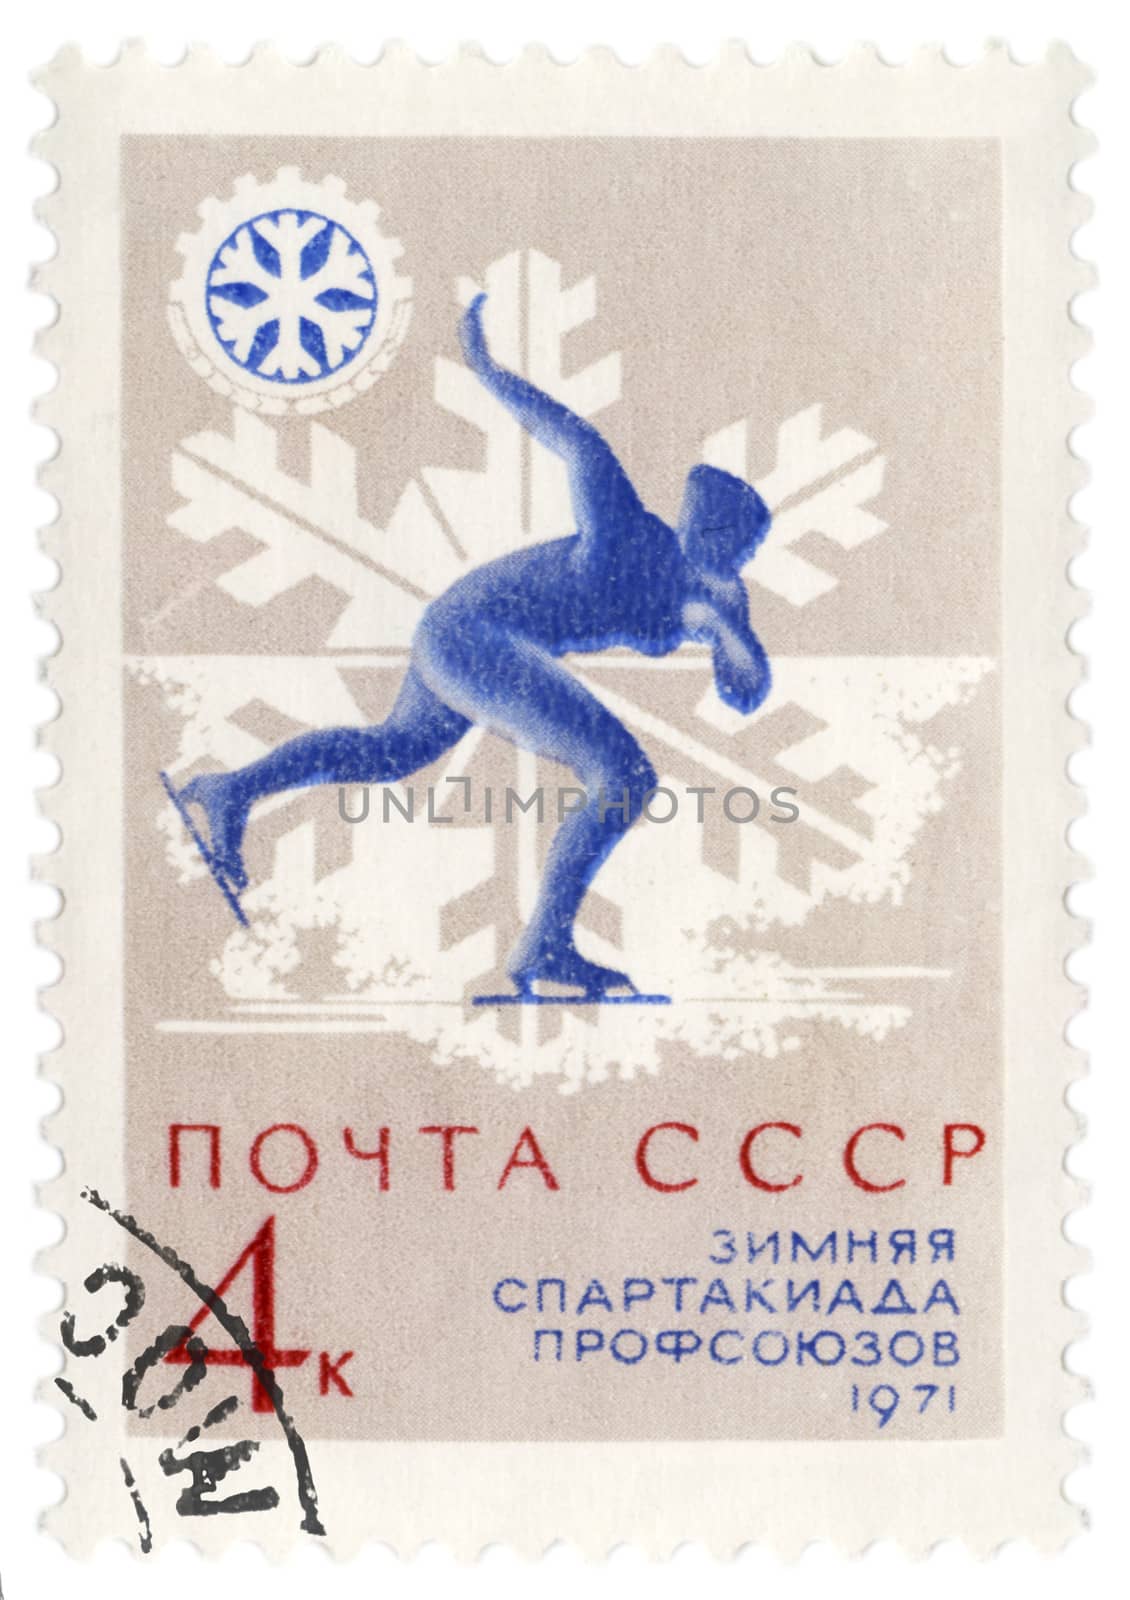 Running skater on post stamp by wander